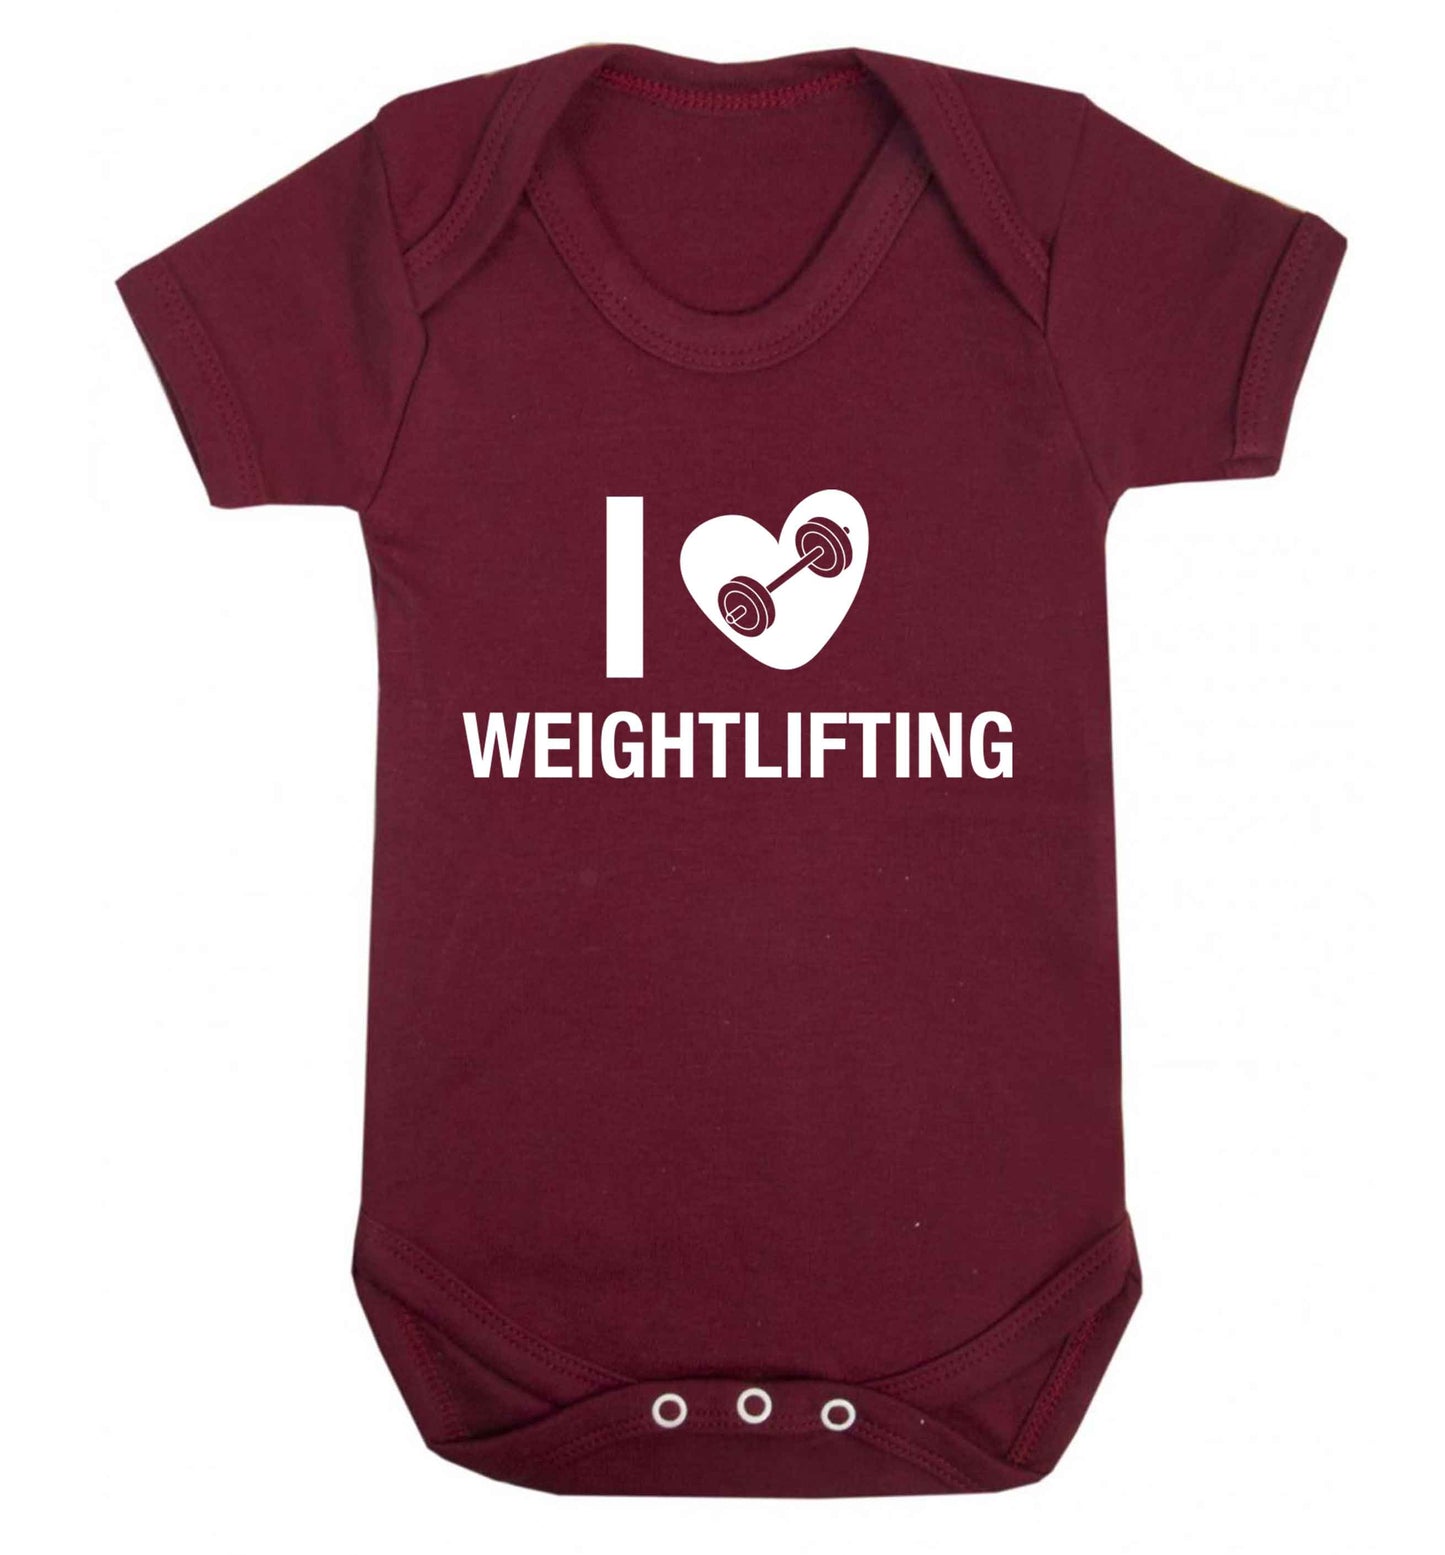 I love weightlifting Baby Vest maroon 18-24 months